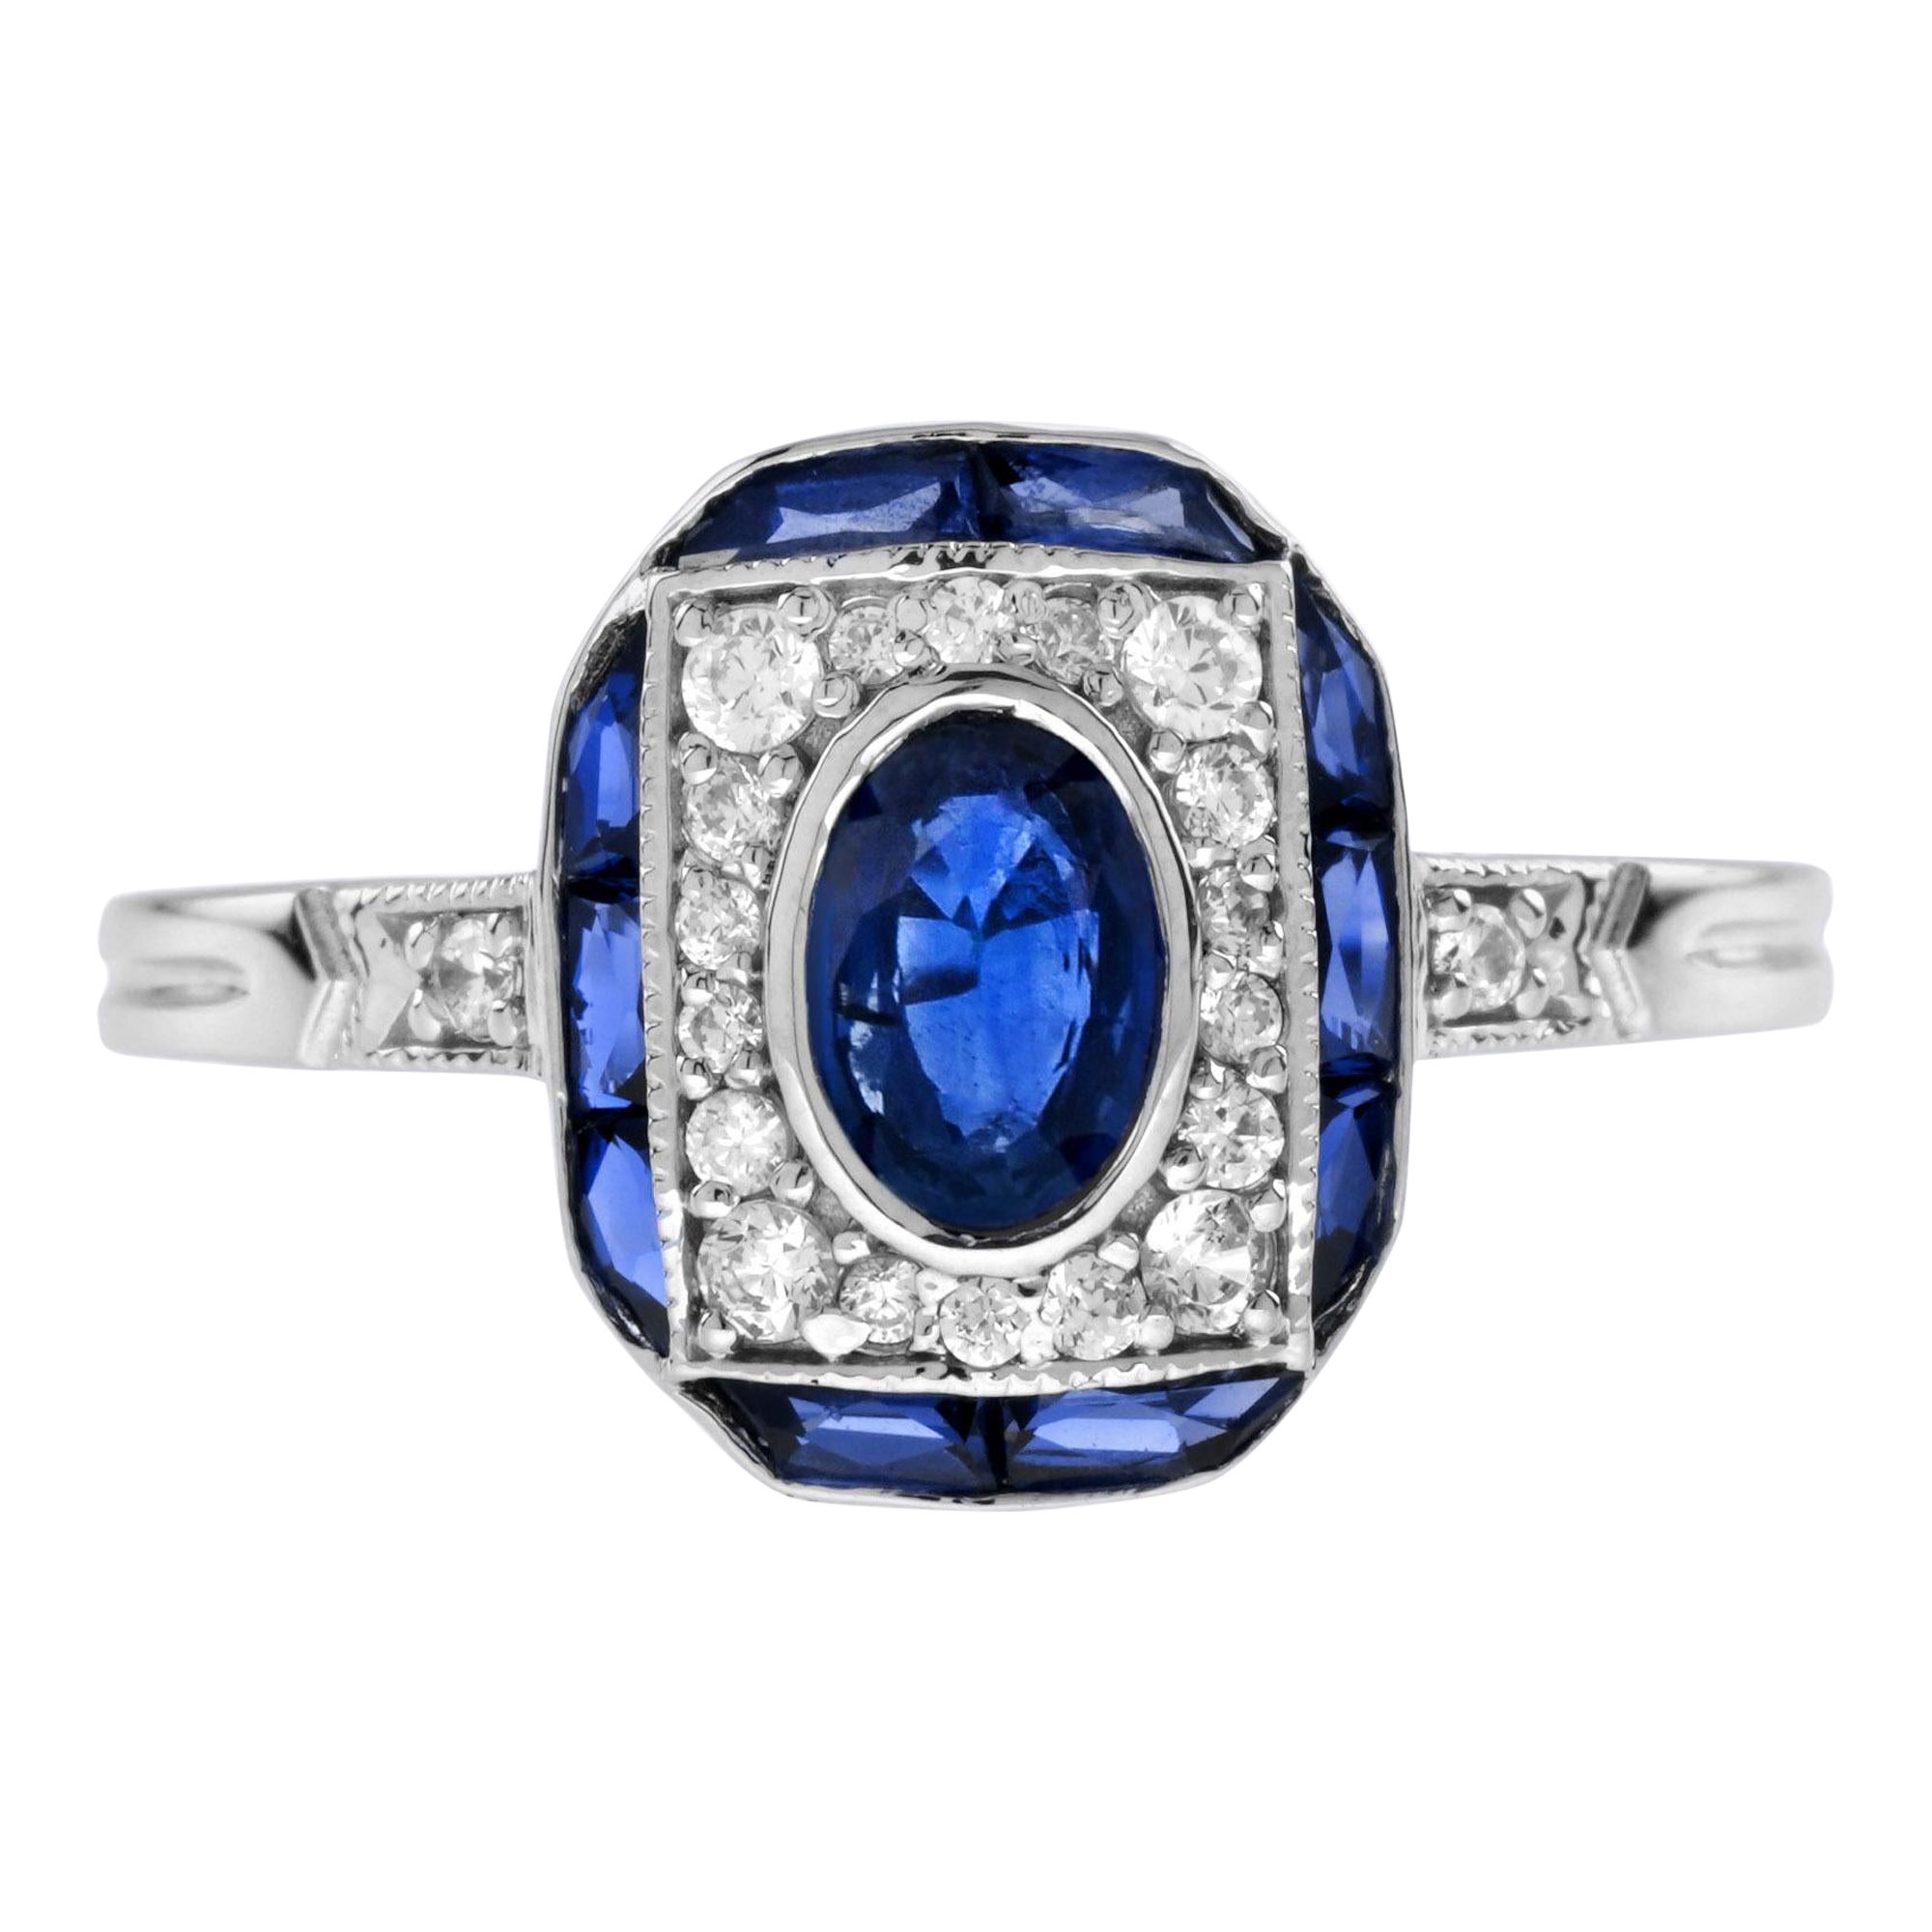 For Sale:  Oval Blue Sapphire and Diamond Art Deco Style Engagement Ring in 18K White Gold